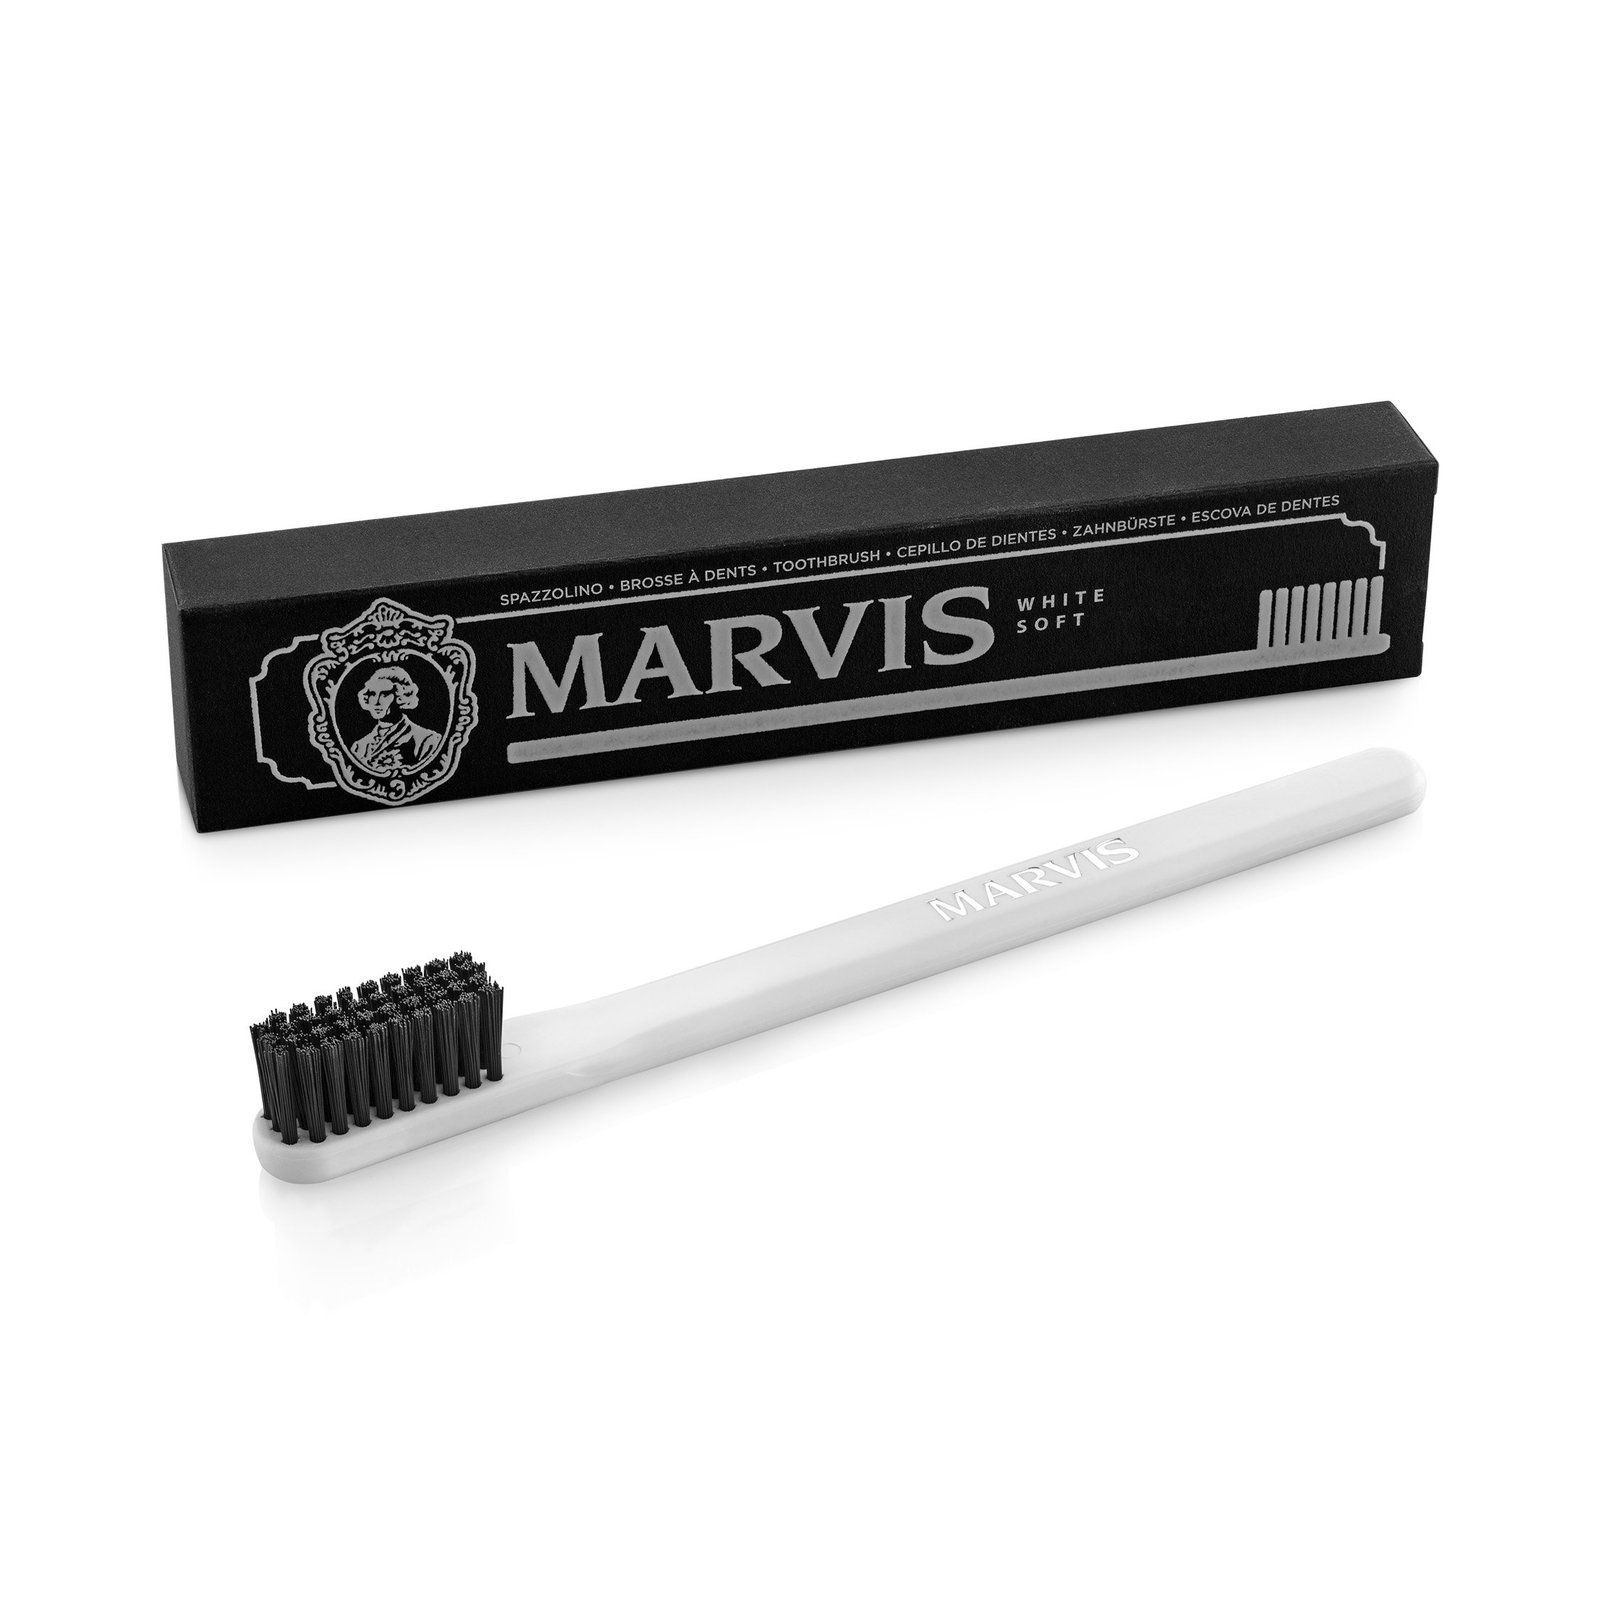 Marvis Toothbrush Soft White 1 st